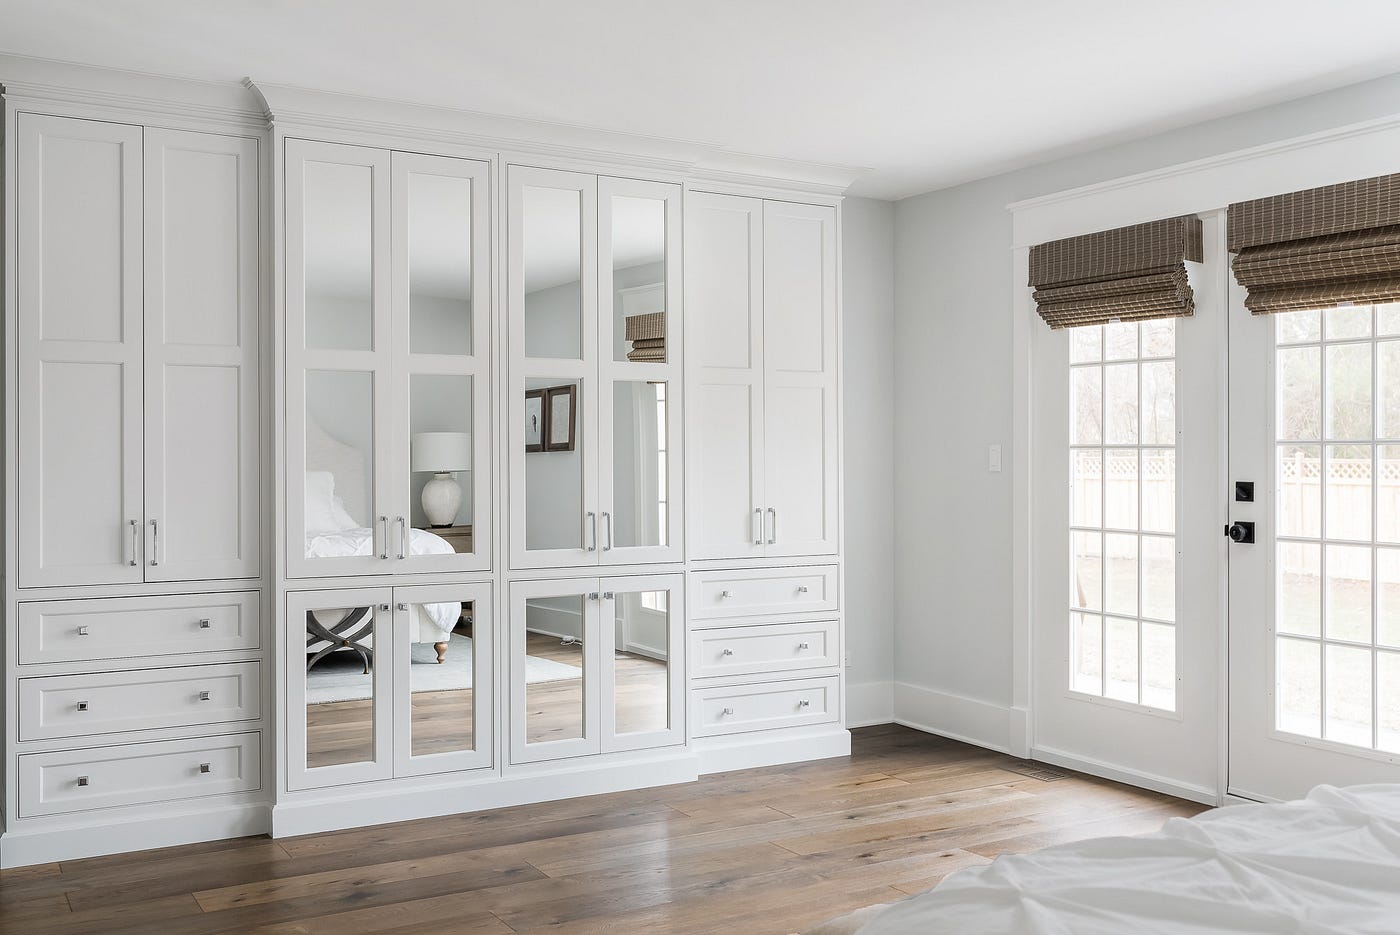 A Brief History of Built-In Closets: From the 1800s to Today